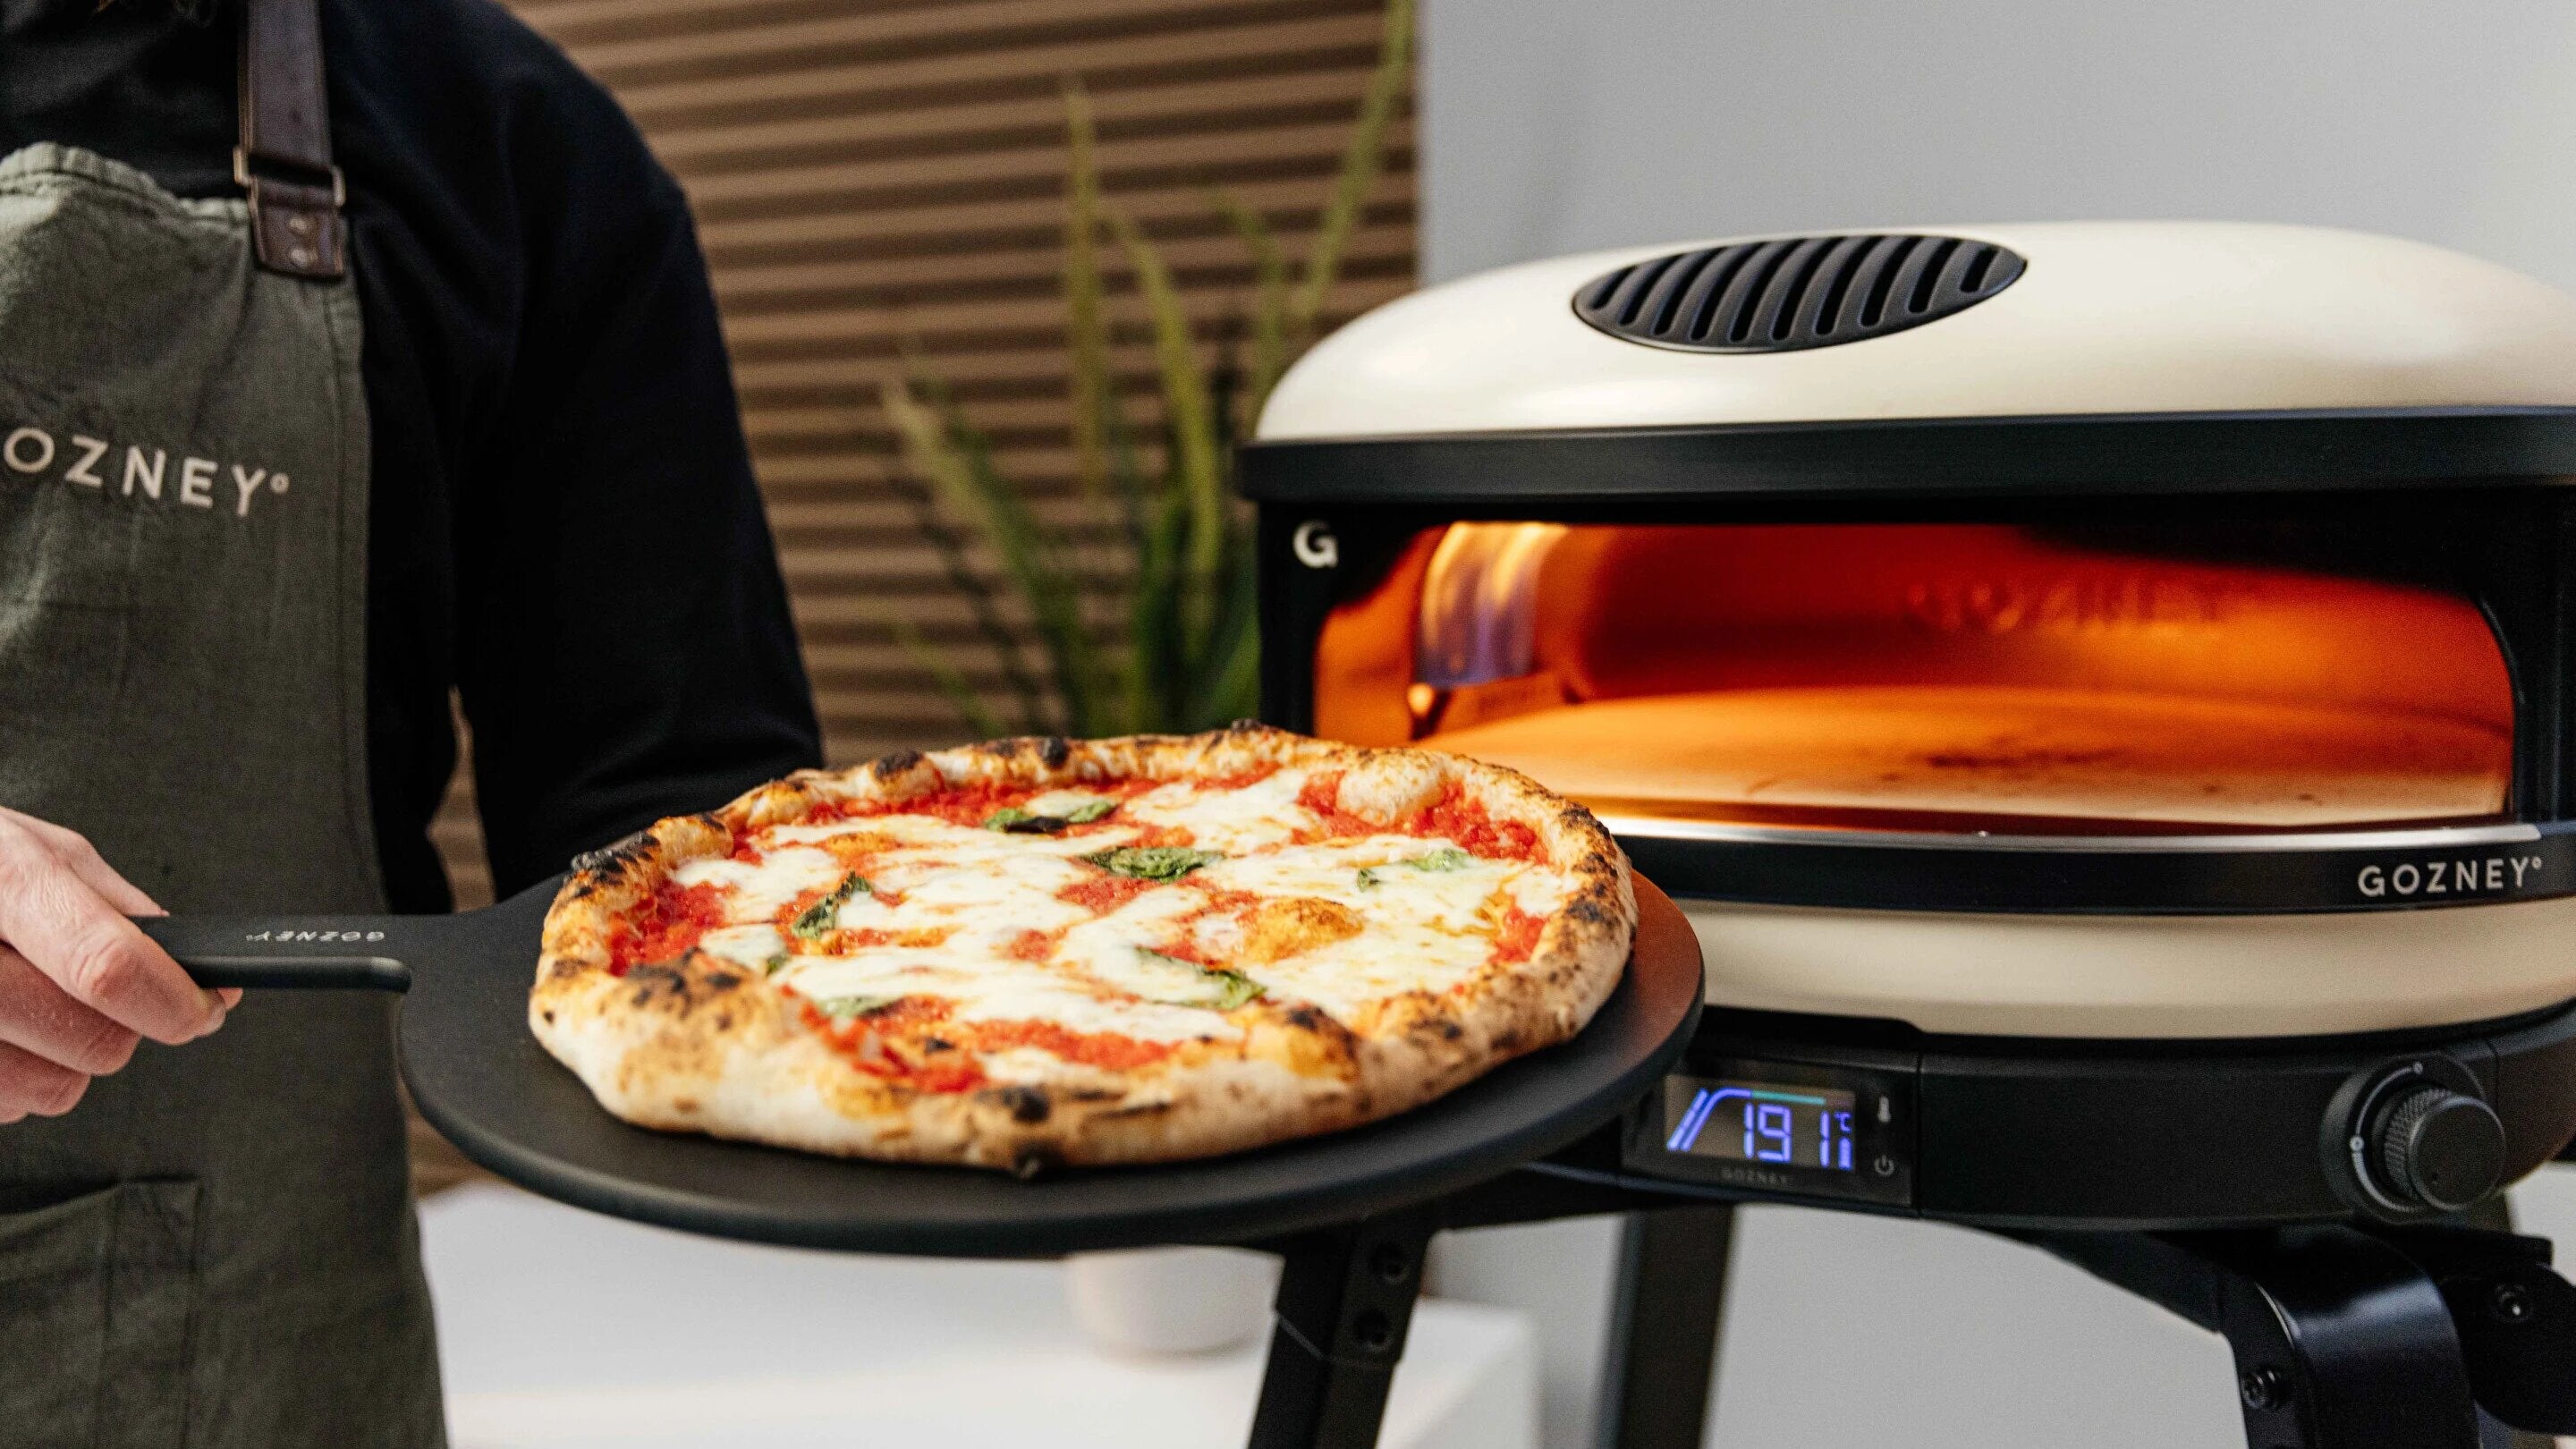 Puling Cooked Pizza Out Of The Gozney Arc XL Pizza Oven - Lifestyle Image